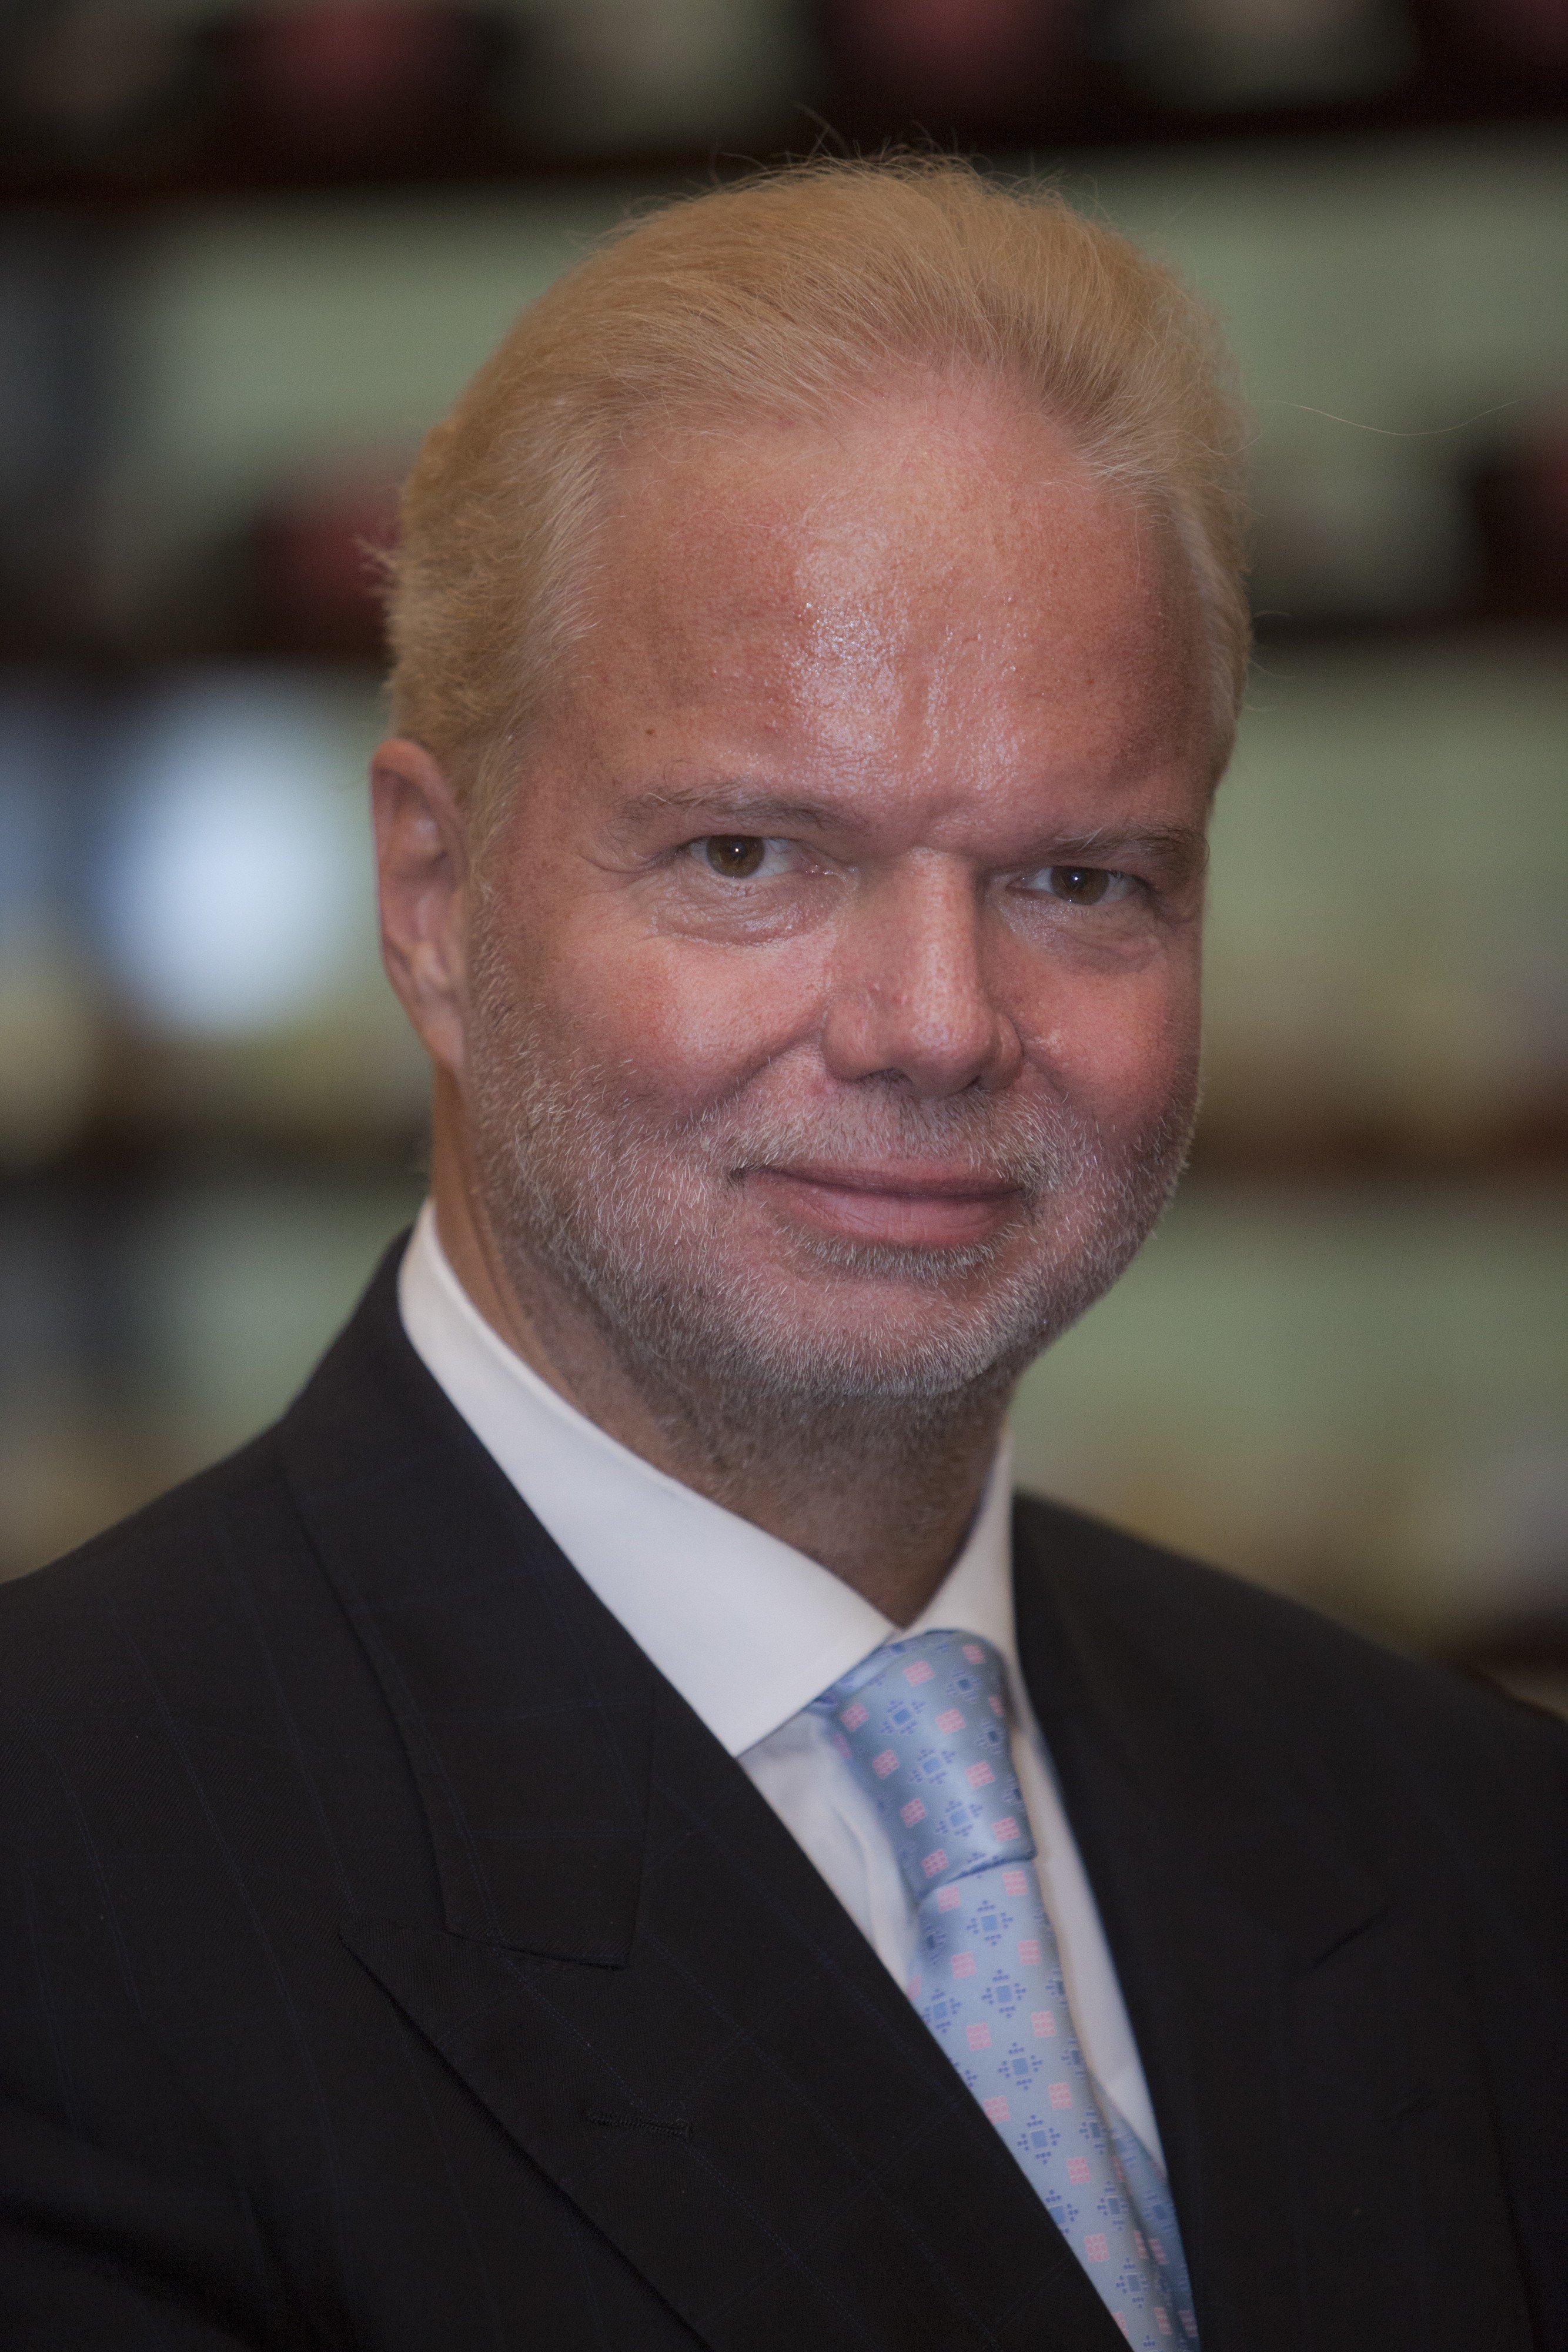 Dr Utz Claassen, chairman of the executive board and CEO, Syntellix